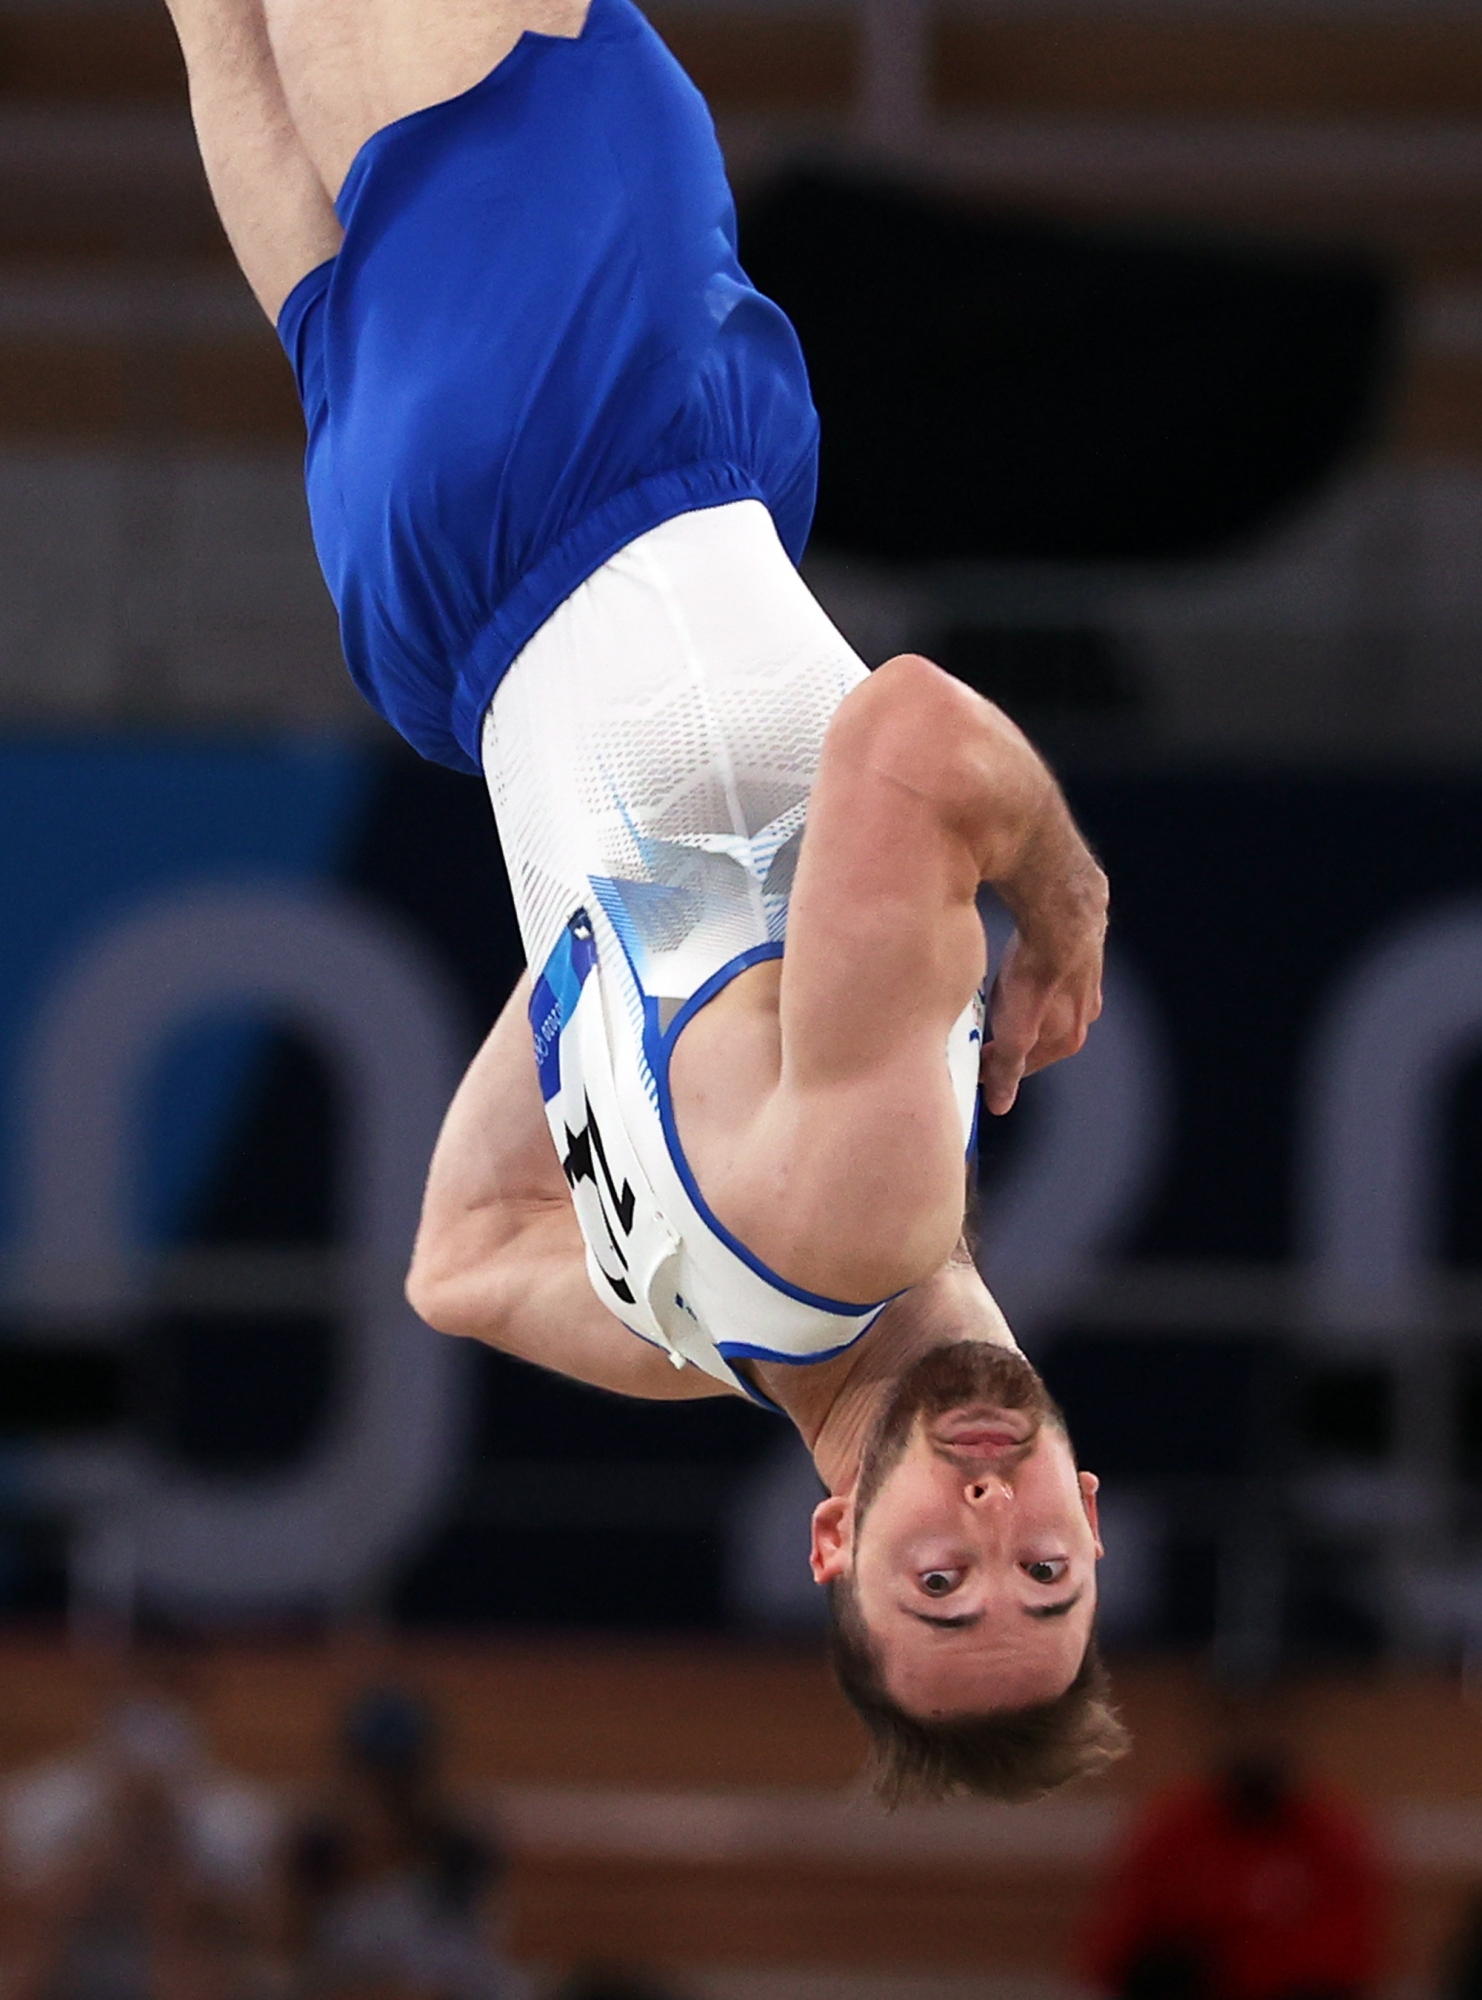 epa09384453 Artem Dolgopyat of Israel competes in the Men's Floor Exercise Final during the Artistic Gymnastics events of the Tokyo 2020 Olympic Games at the Ariake Gymnastics Centre in Tokyo, Japan, 01 August 2021. EPA/FAZRY ISMAIL